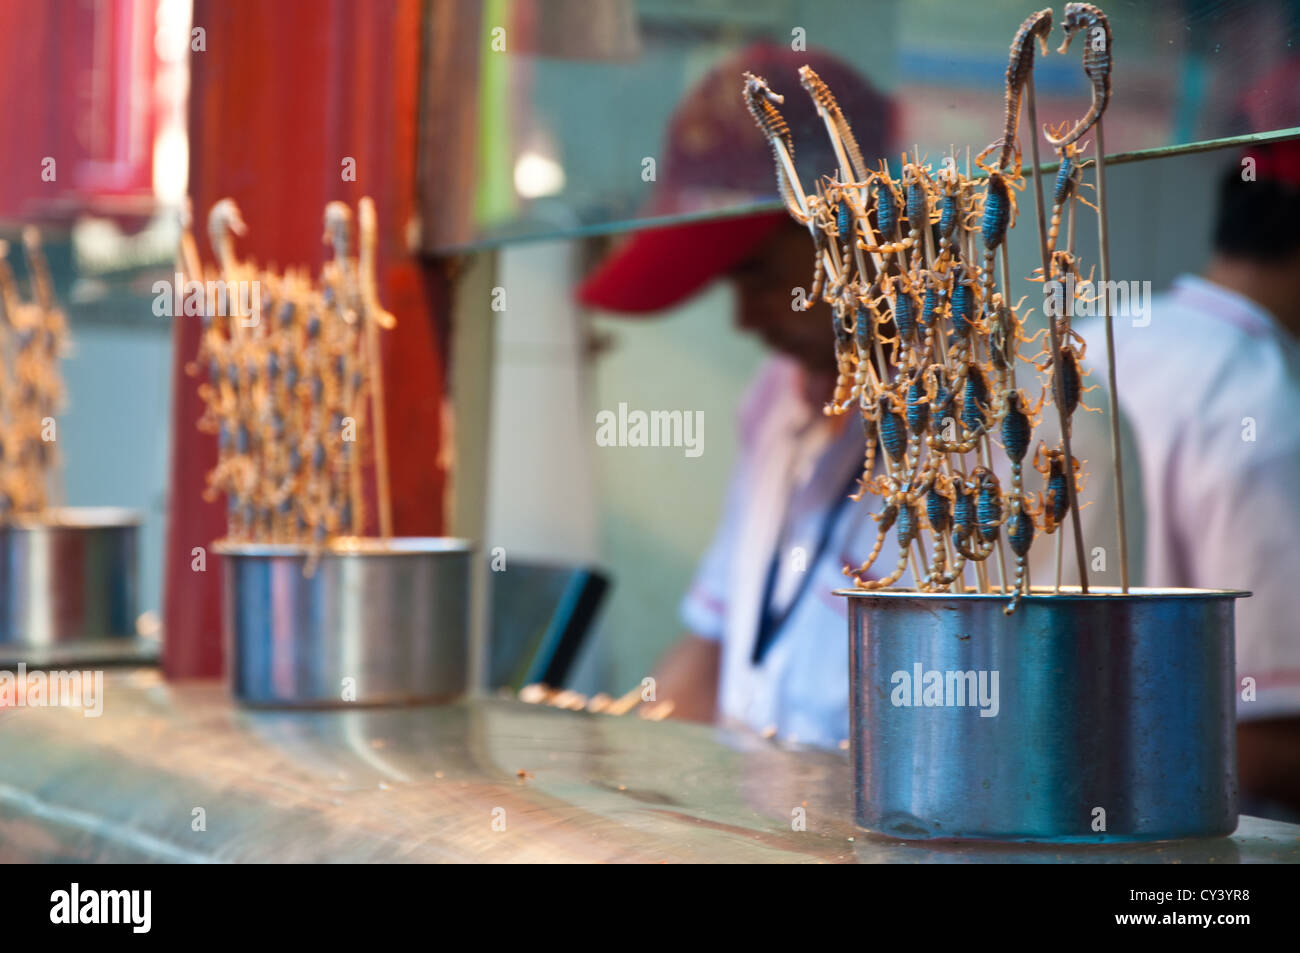 Skewered scorpions and sea horses for sale at the Donghuamen Night Market, on Wangfujing Street in Beijing, China. Stock Photo